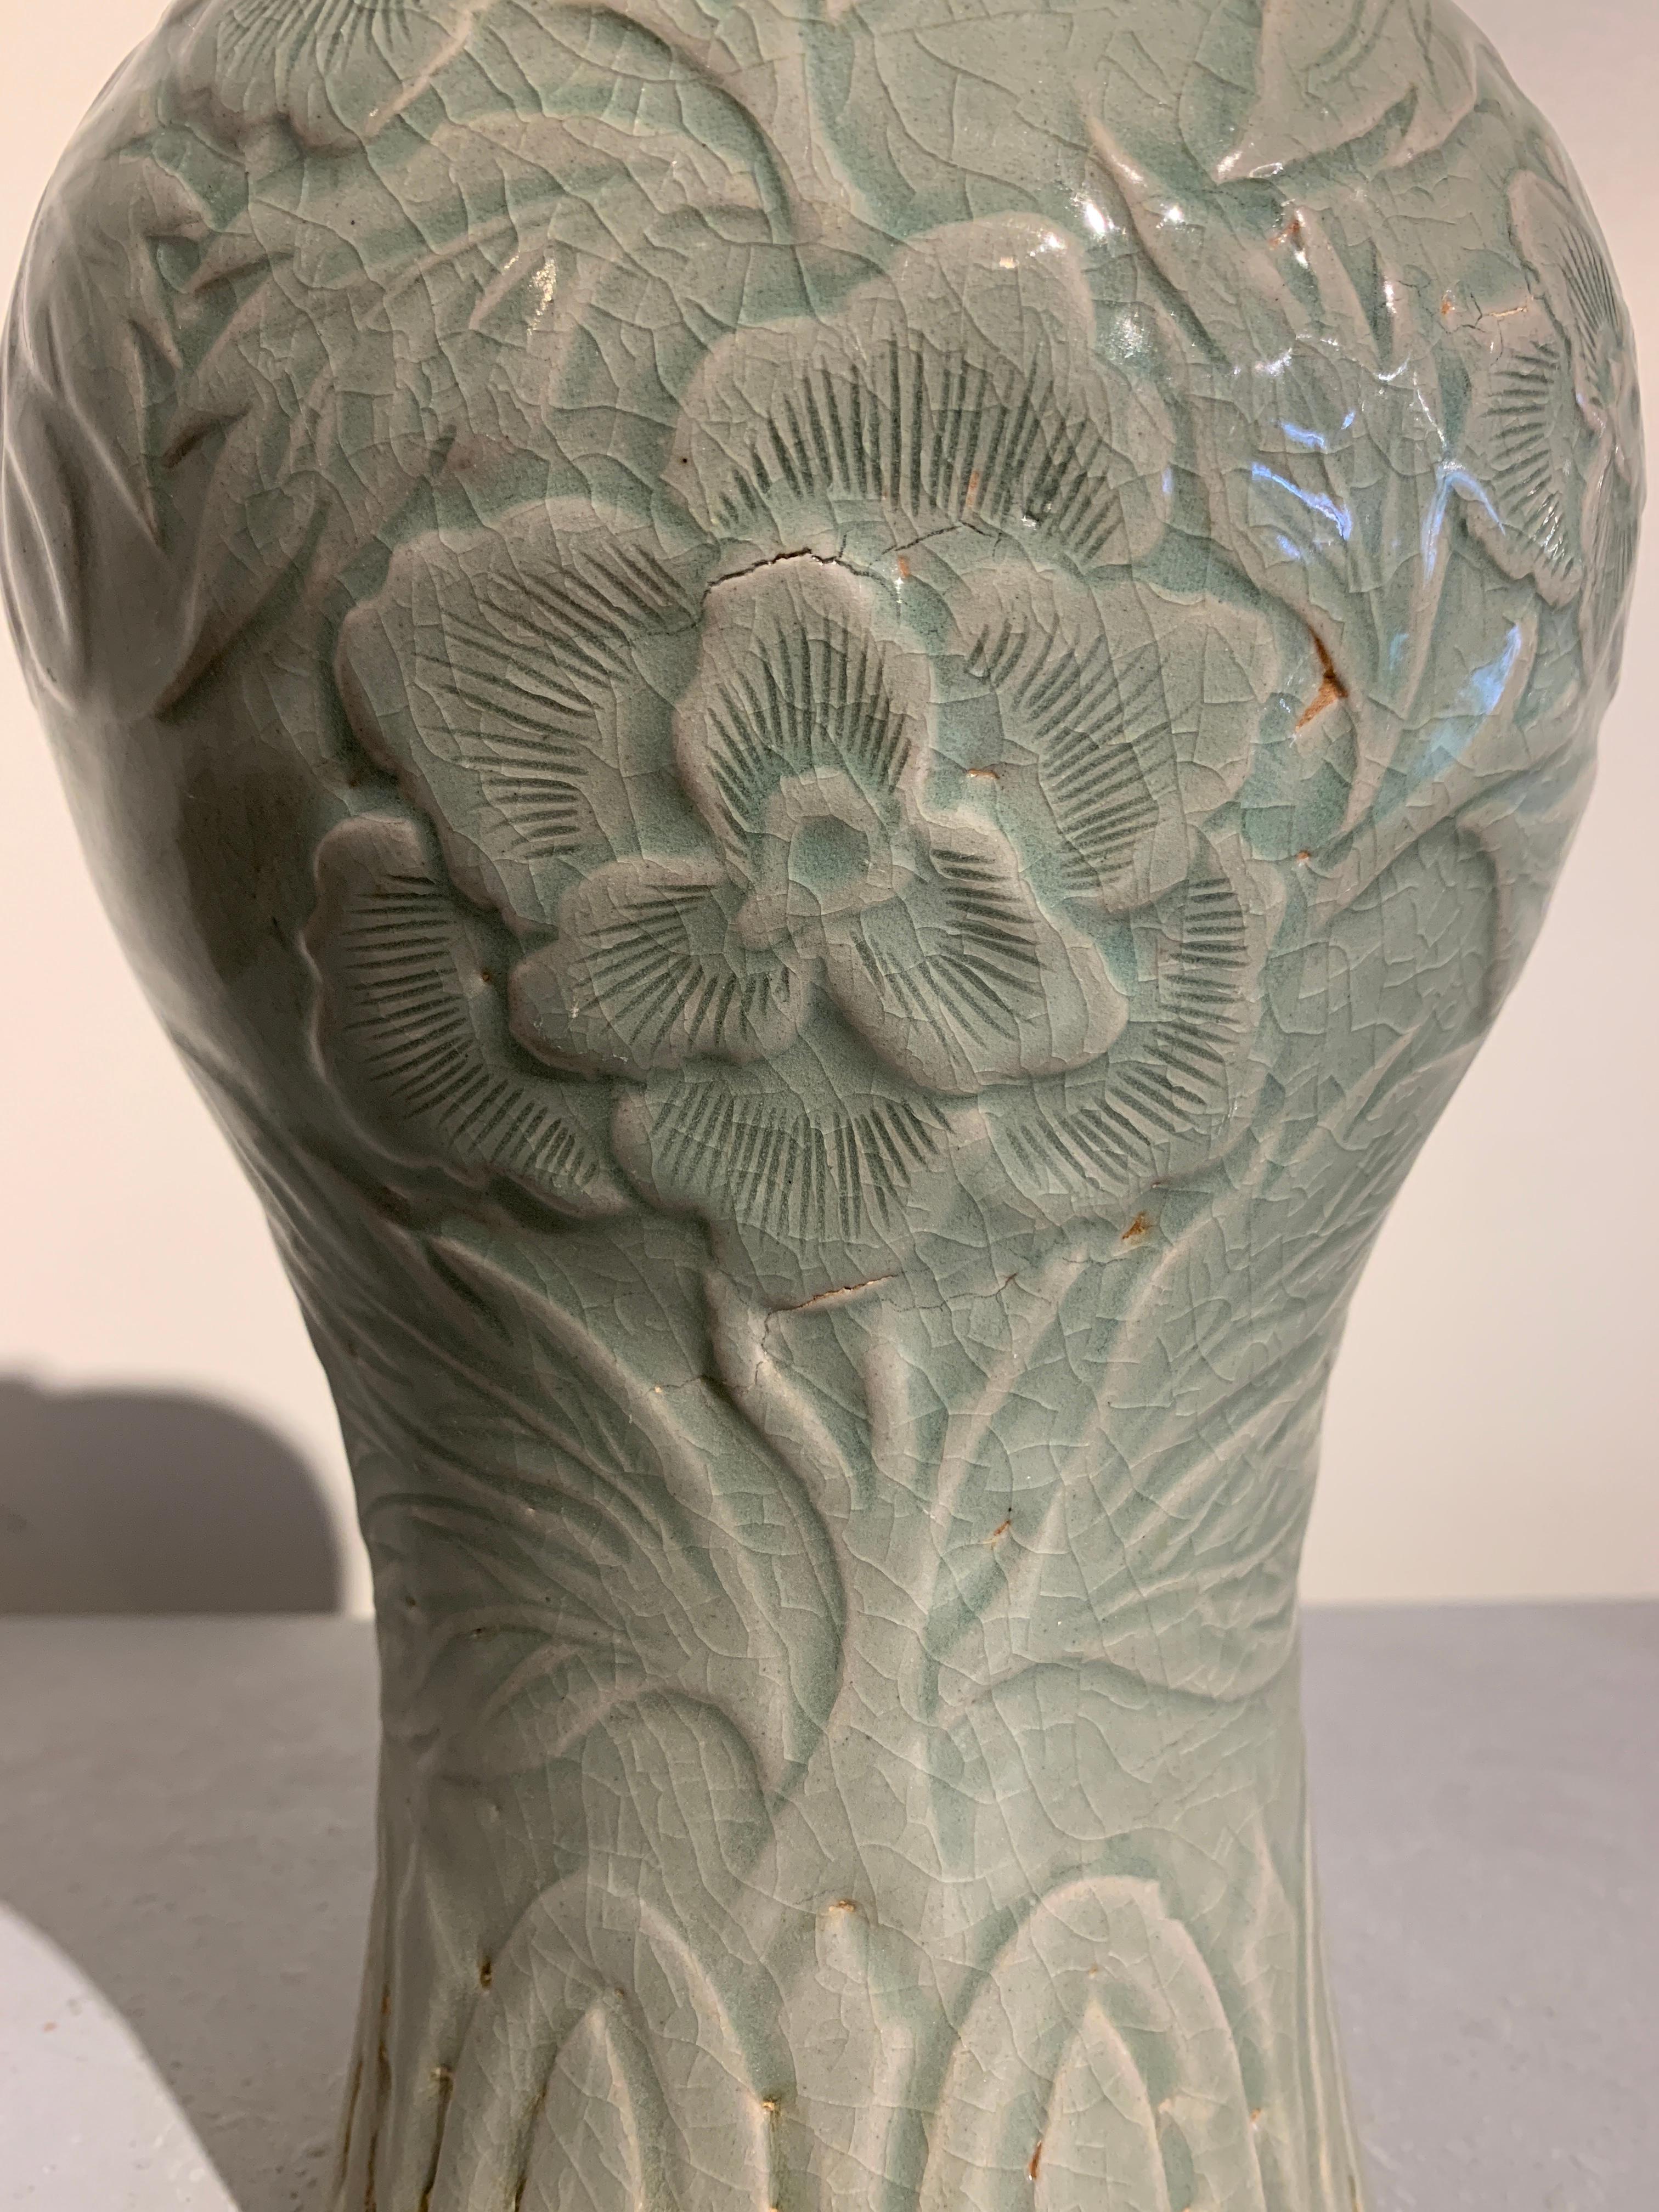 Korean Carved Celadon Vase, Maebyeong, Goryeo Style, Early 20th Century In Good Condition For Sale In Austin, TX